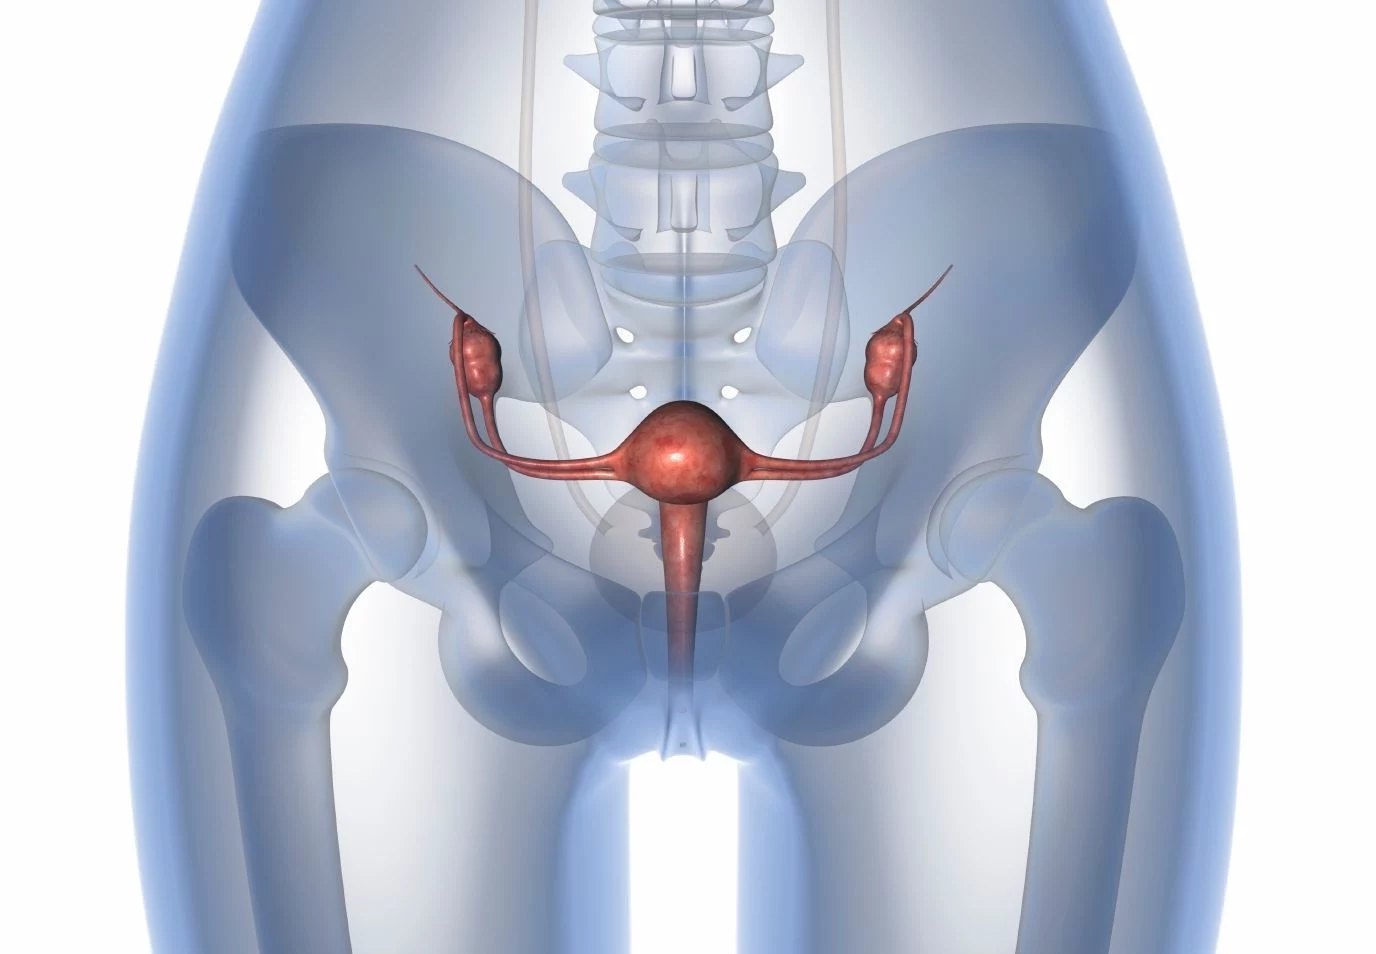 The combination of mirvetuximab soravtansine and rucaparib was found to be well tolerated, with encouraging activity reported in heavily pretreated patients with endometrial, ovarian, fallopian tube, or primary peritoneal cancer.